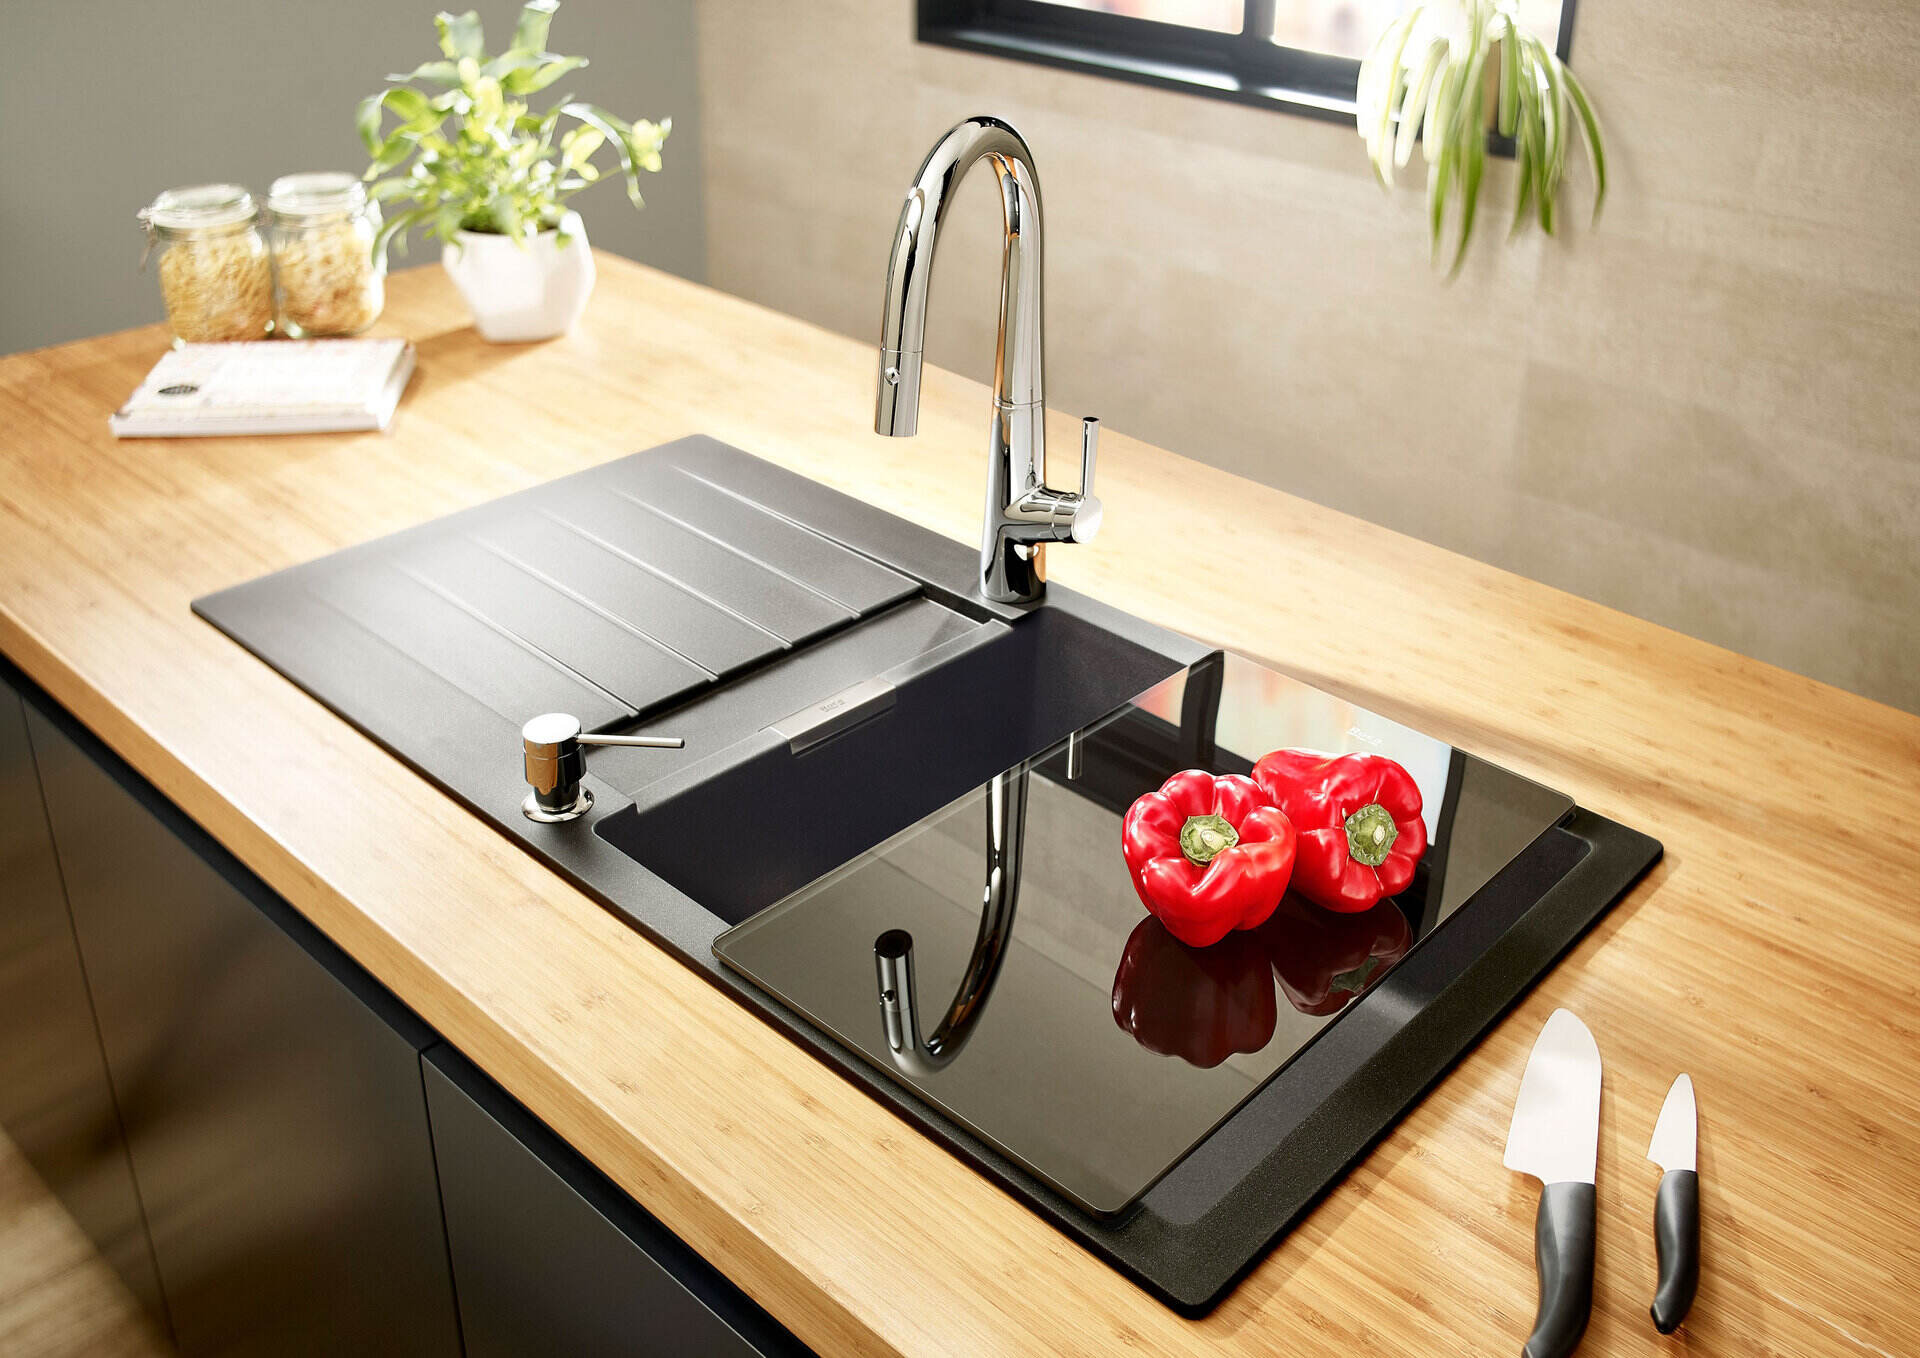 How To Install Sink In Countertop